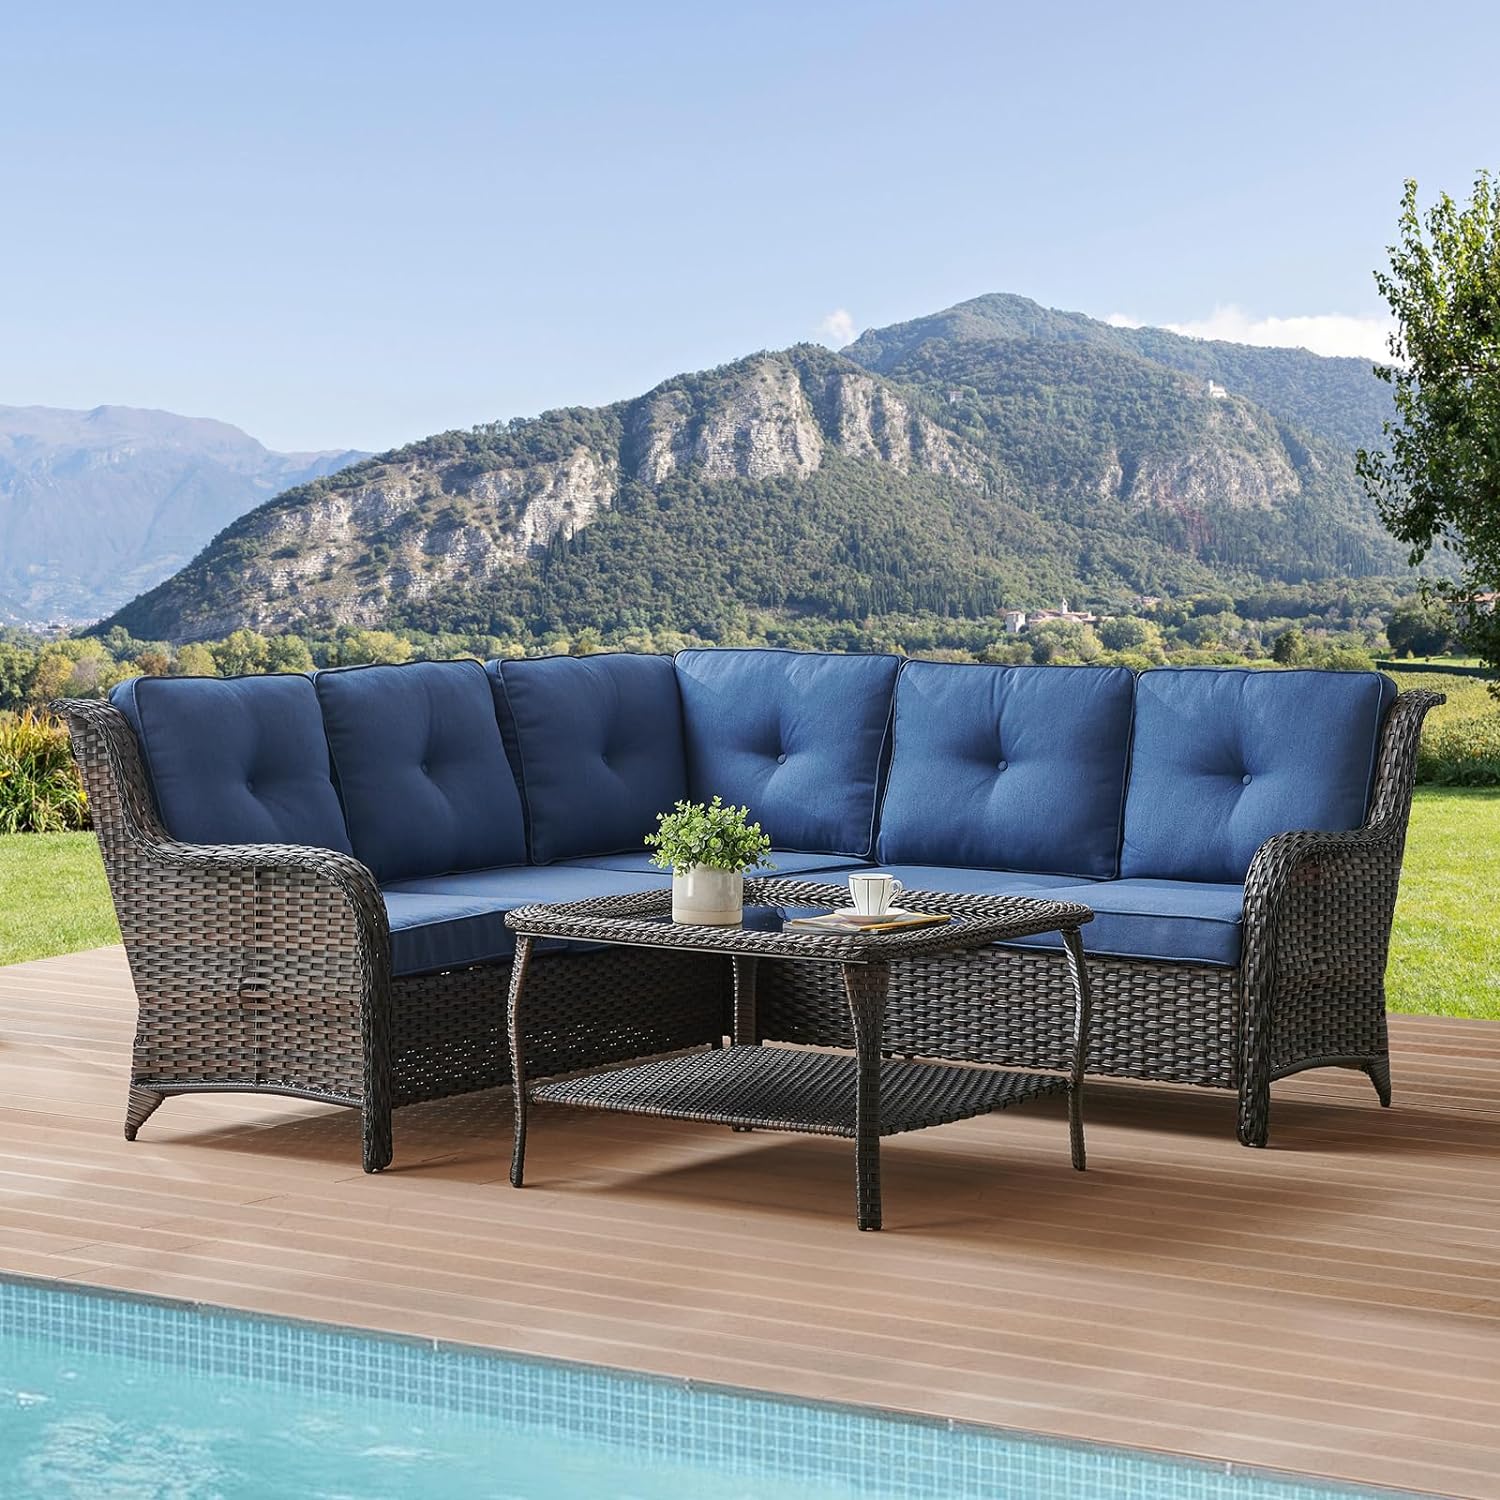 Wicker Outdoor Patio Furniture Sets - Rattan Sofa Sectional Conversation Set with 2 Loveseat and 1 Corner Sofa and 1 Square Glass Top Coffee Table(Brown Wicker/Blue Cushion)